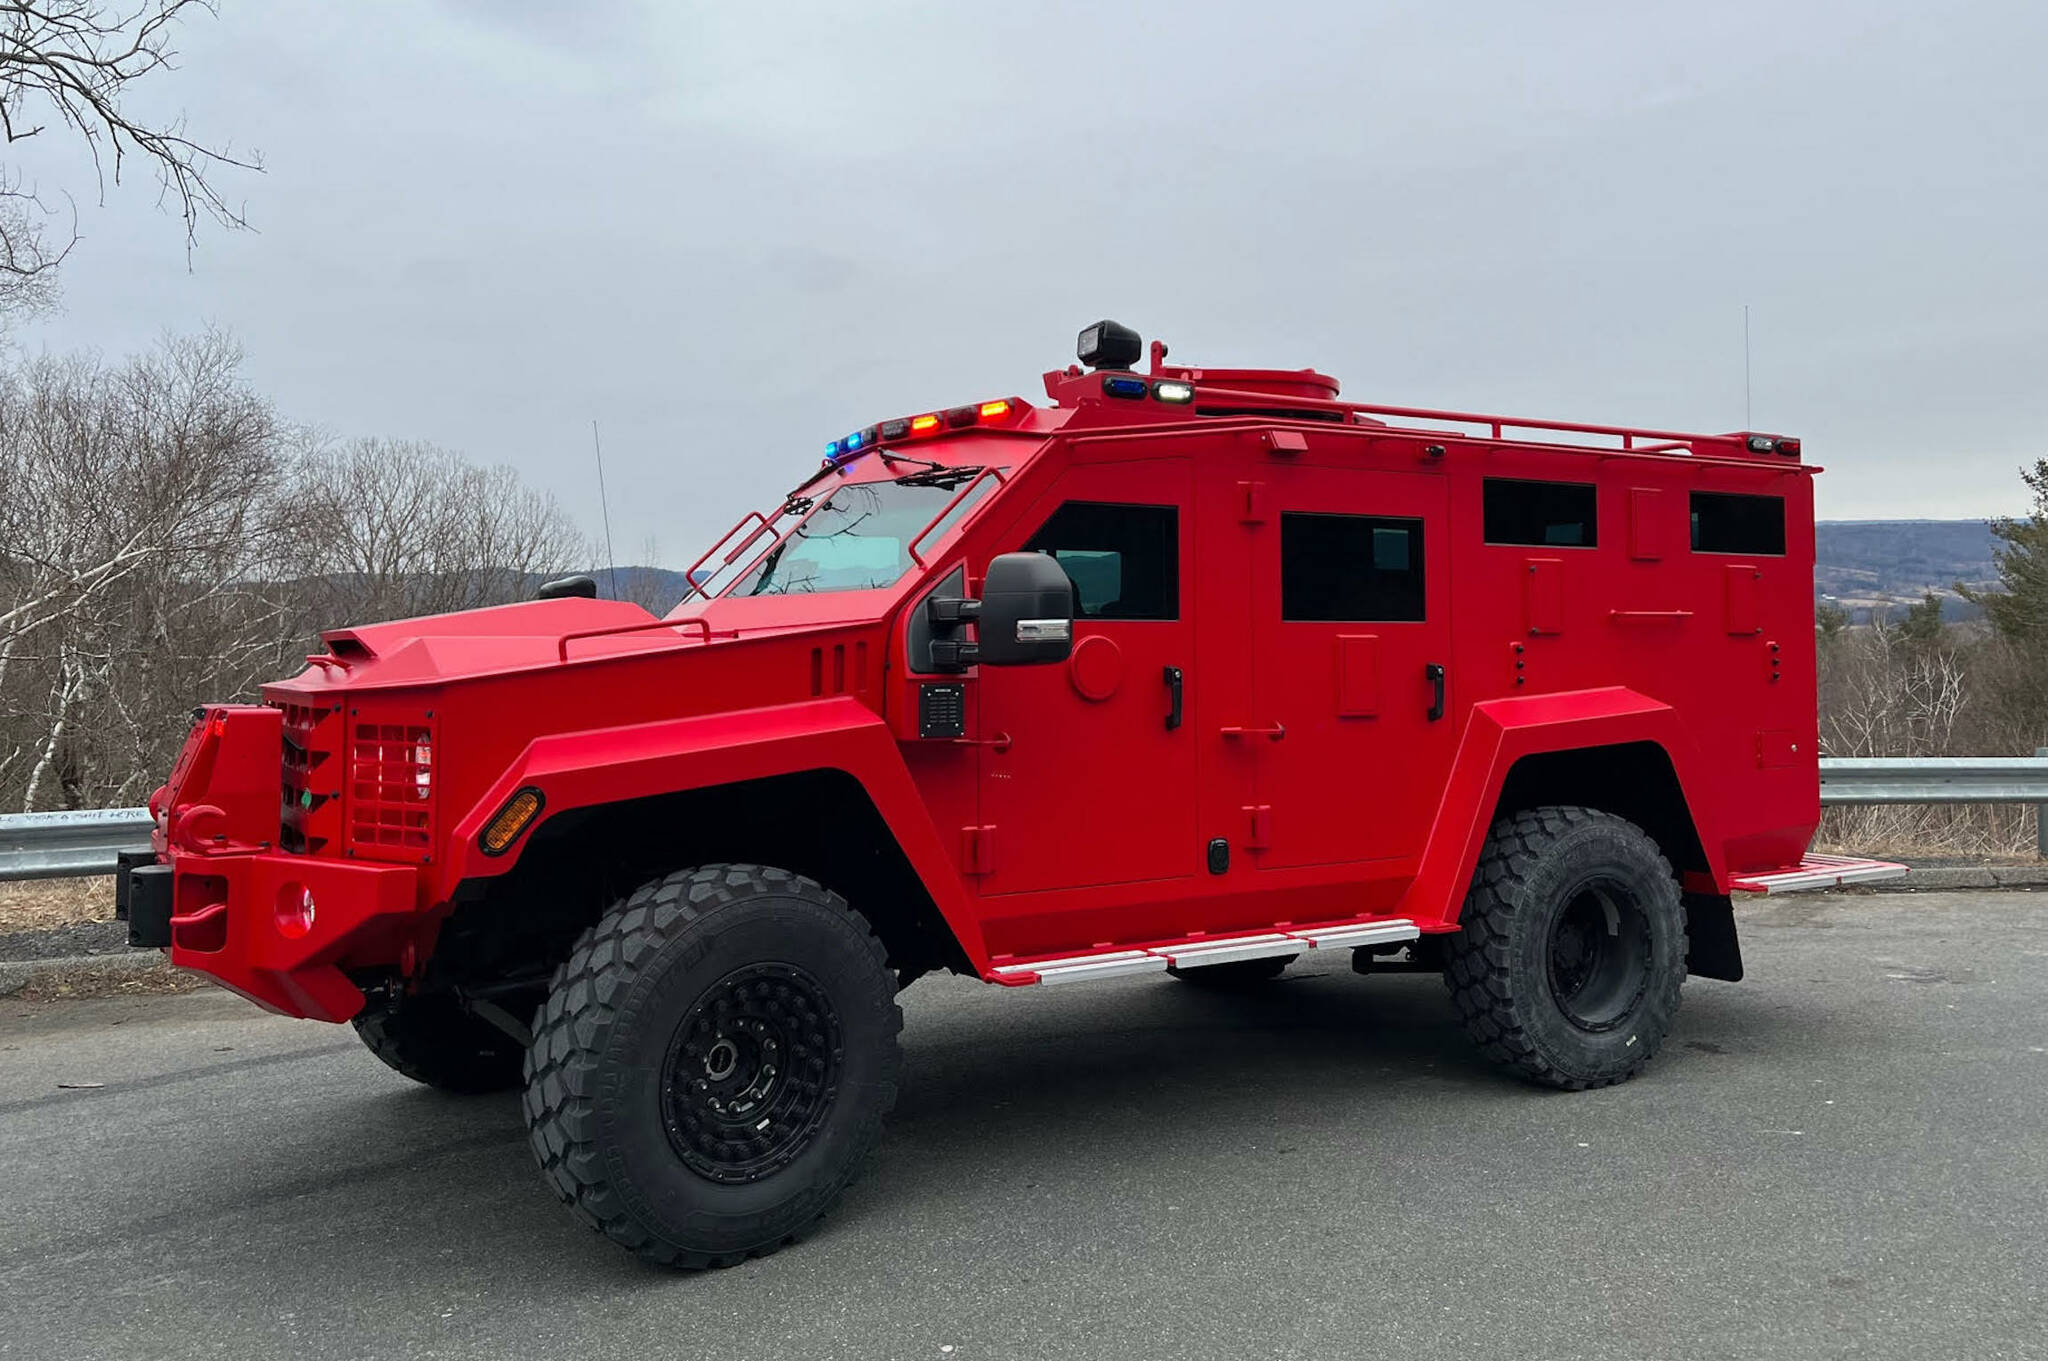 This is a photo of the Juneau Police Department’s new armored security vehicle that arrived in March. (Courtesy / Krag Campbell)